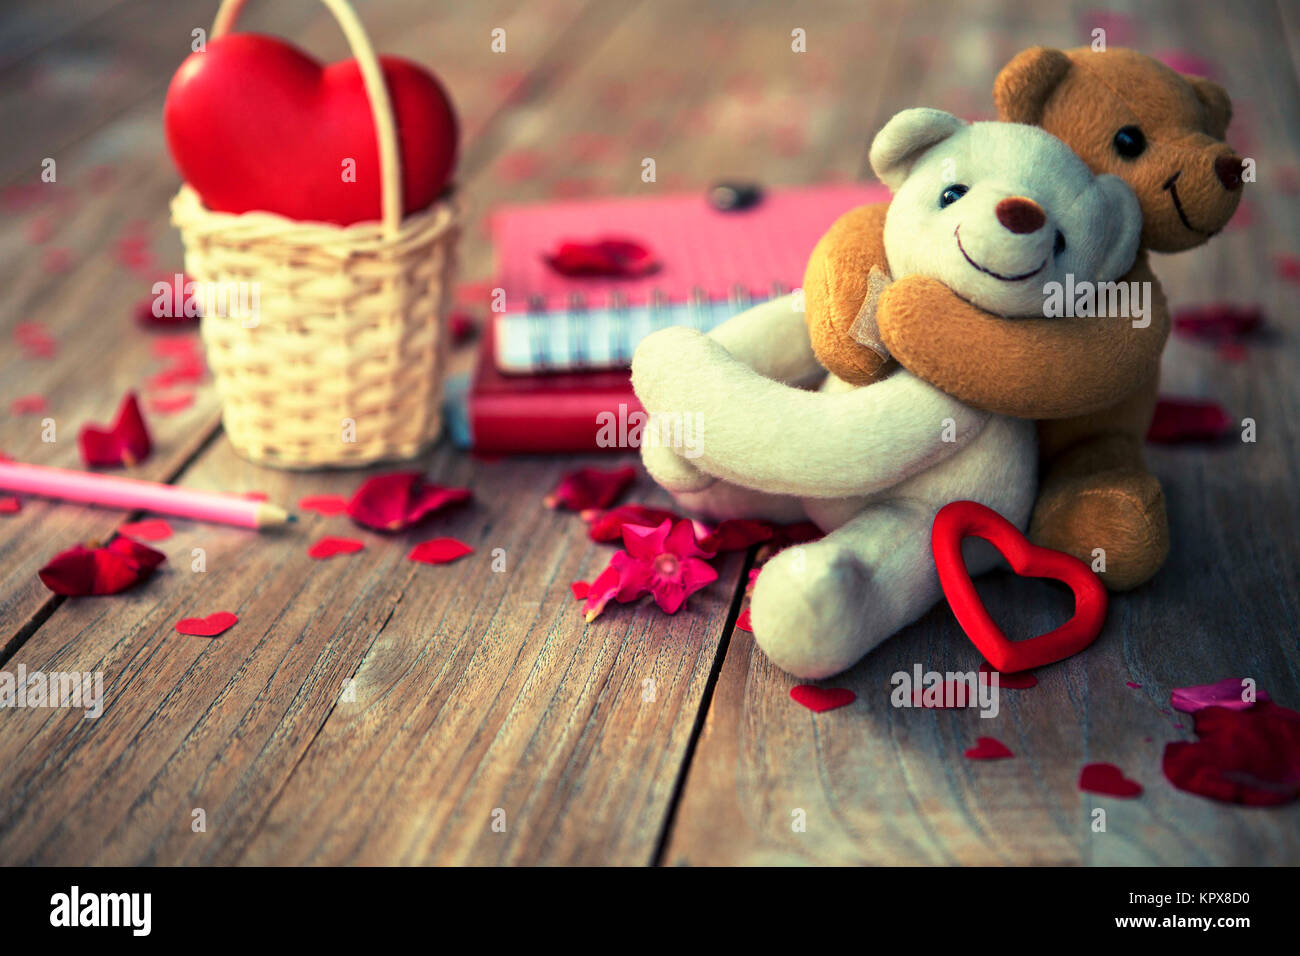 lovely teddy bears on wooden floor for valentines day, grunge filtered photo Stock Photo